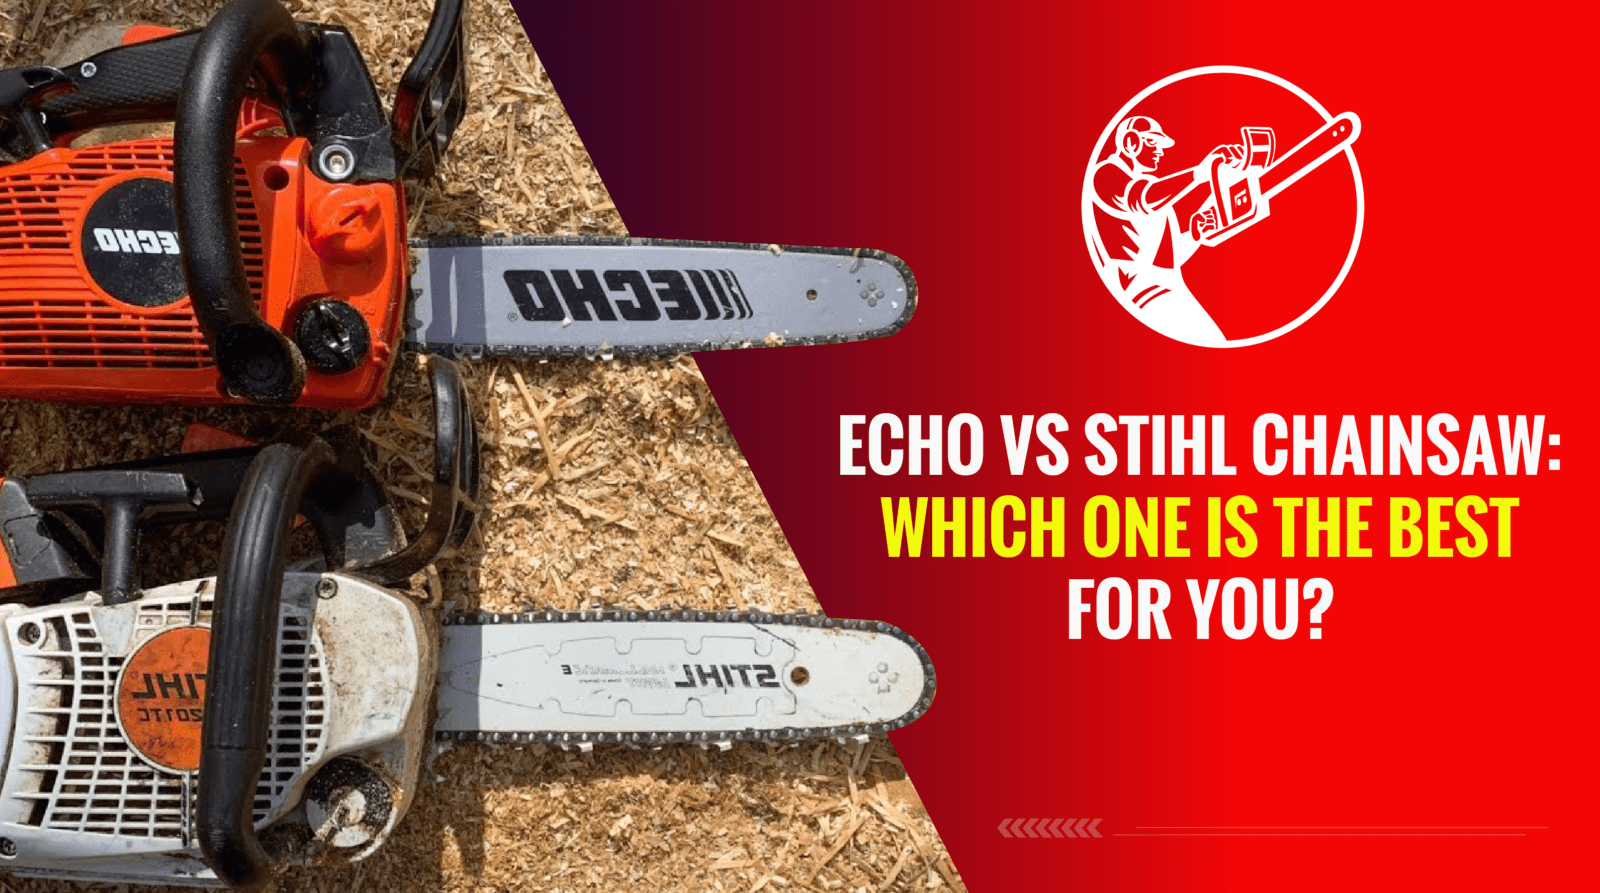 Echo vs Stihl Chainsaw: Which One Is the Best for You?